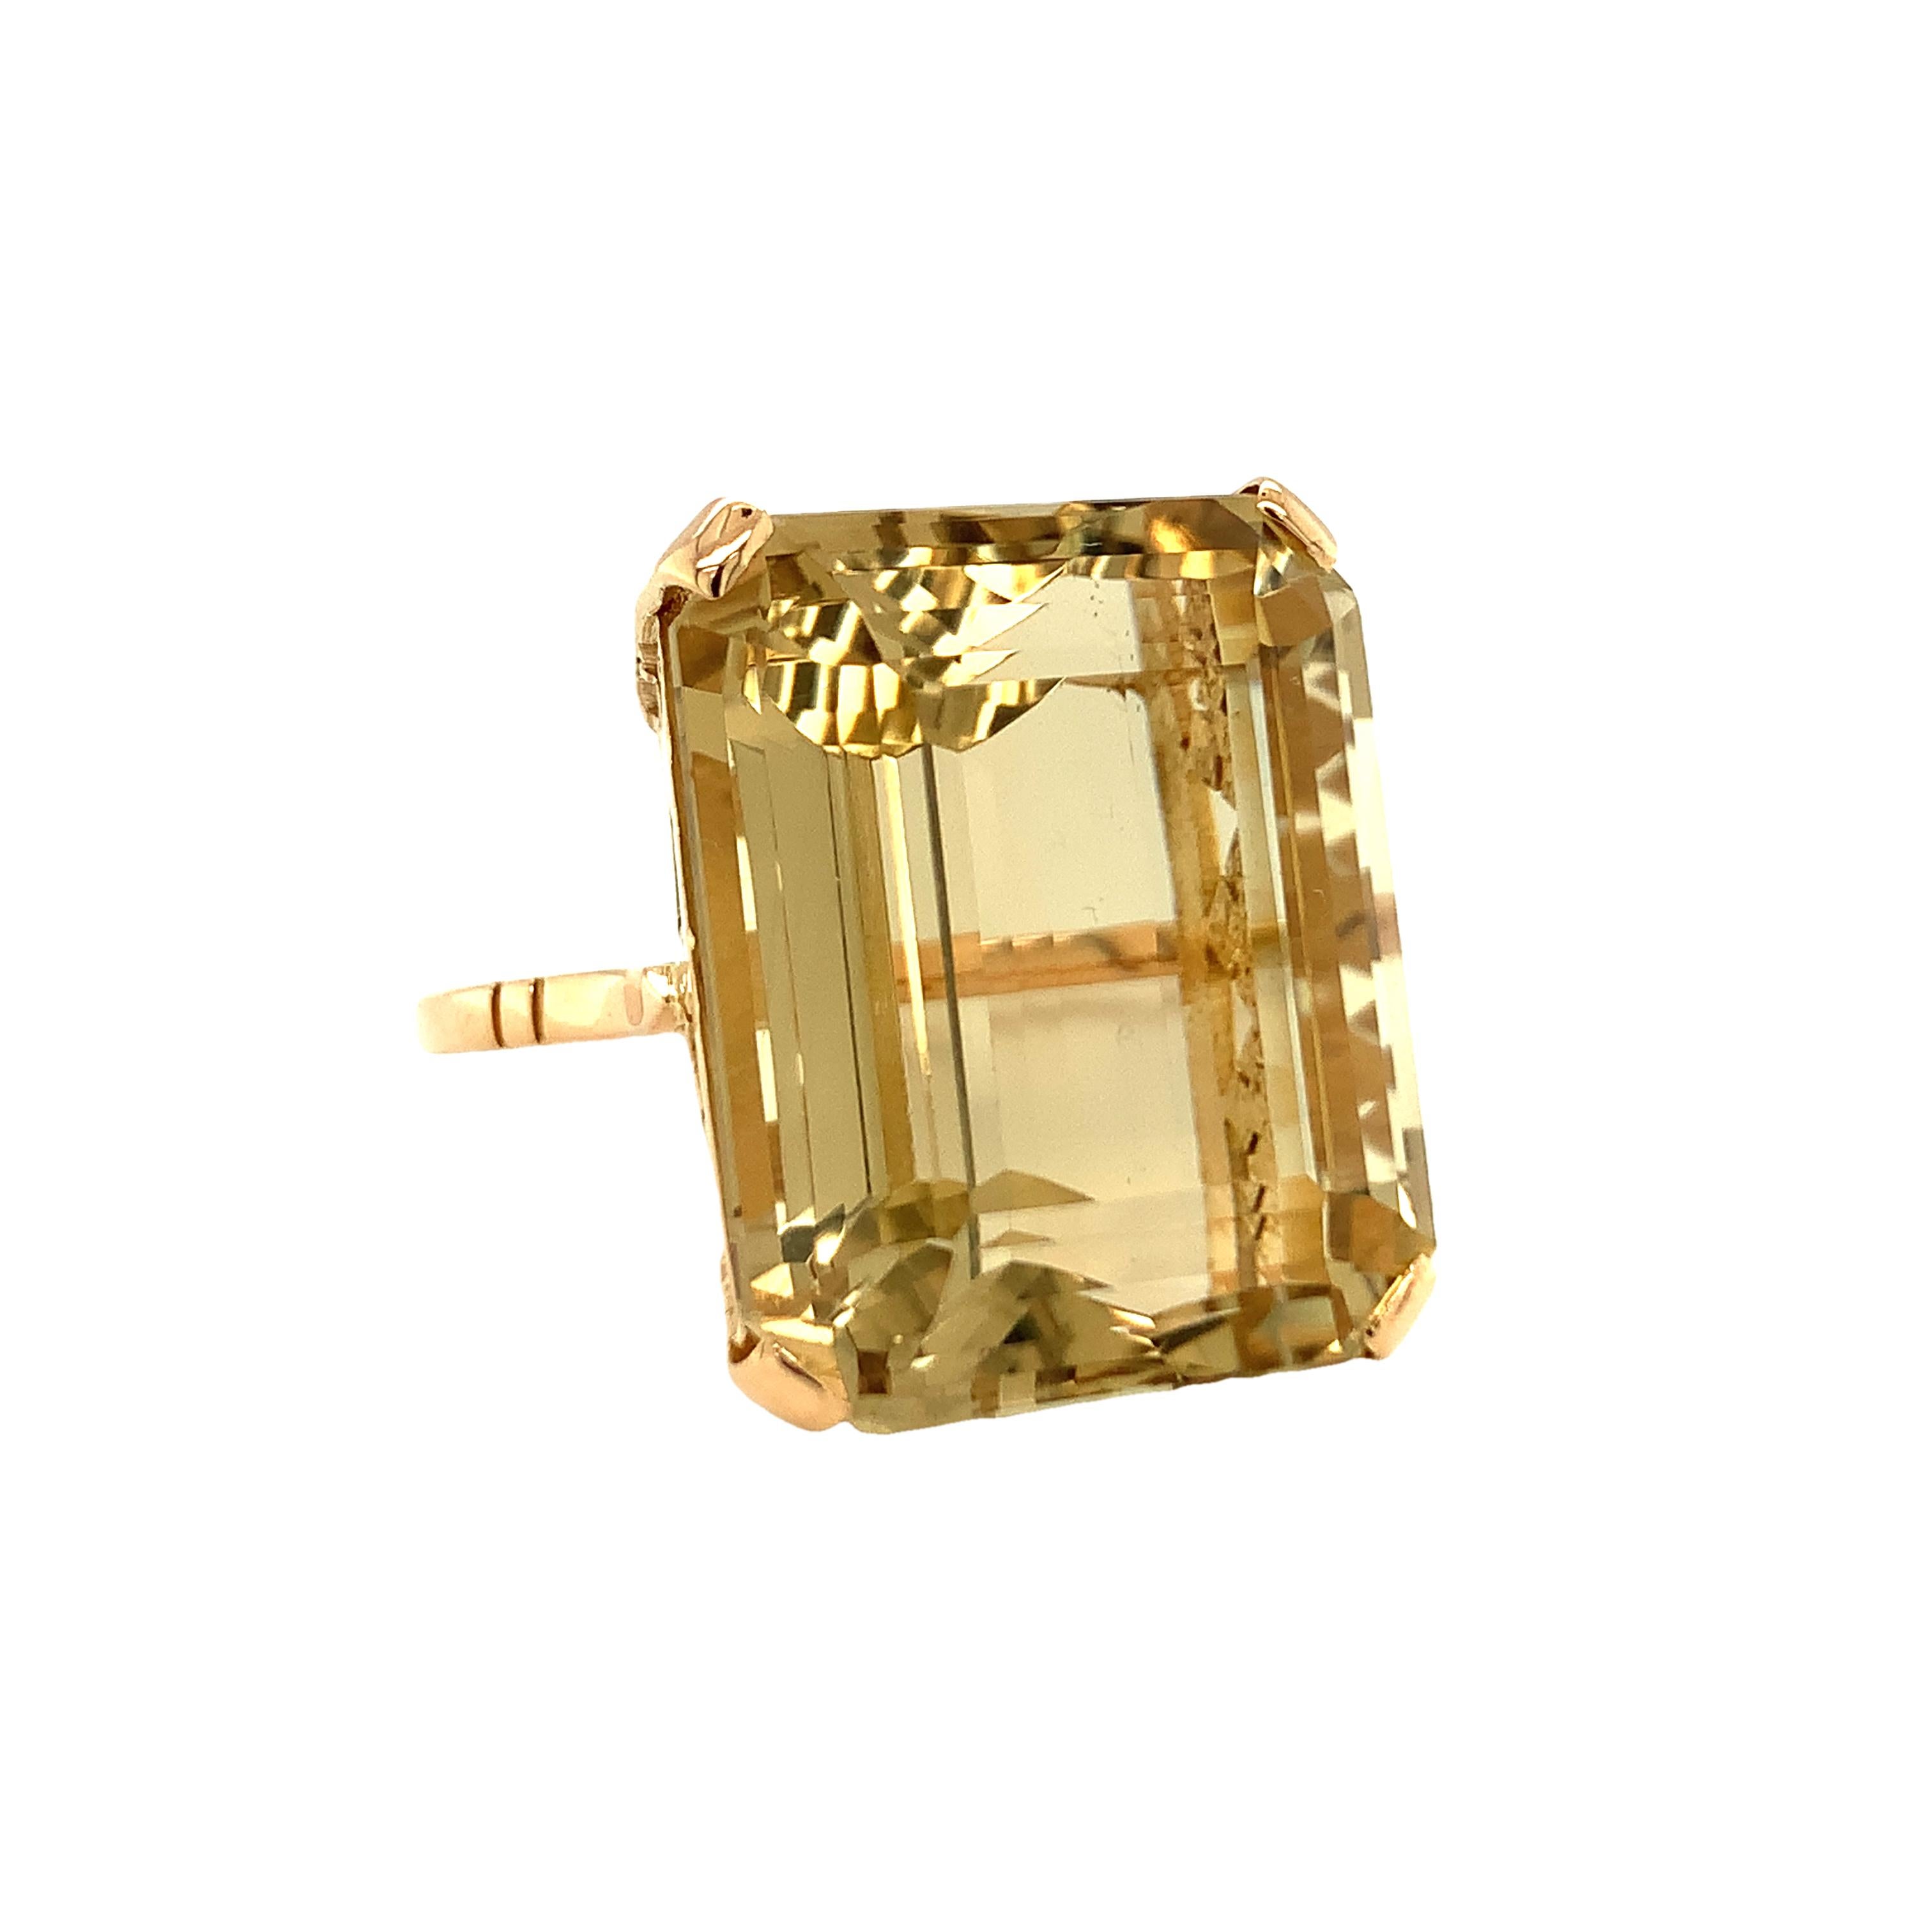 One Retro 18k rose gold citrine ring centering one prong set, emerald cut citrine weighing 42.30 ct. (actual weight) measuring 22 x 18 mm. With intricate designed basket mount.

Golden, grand, substantial.

Metal: 18K rose gold
Gemstone: Citrine =